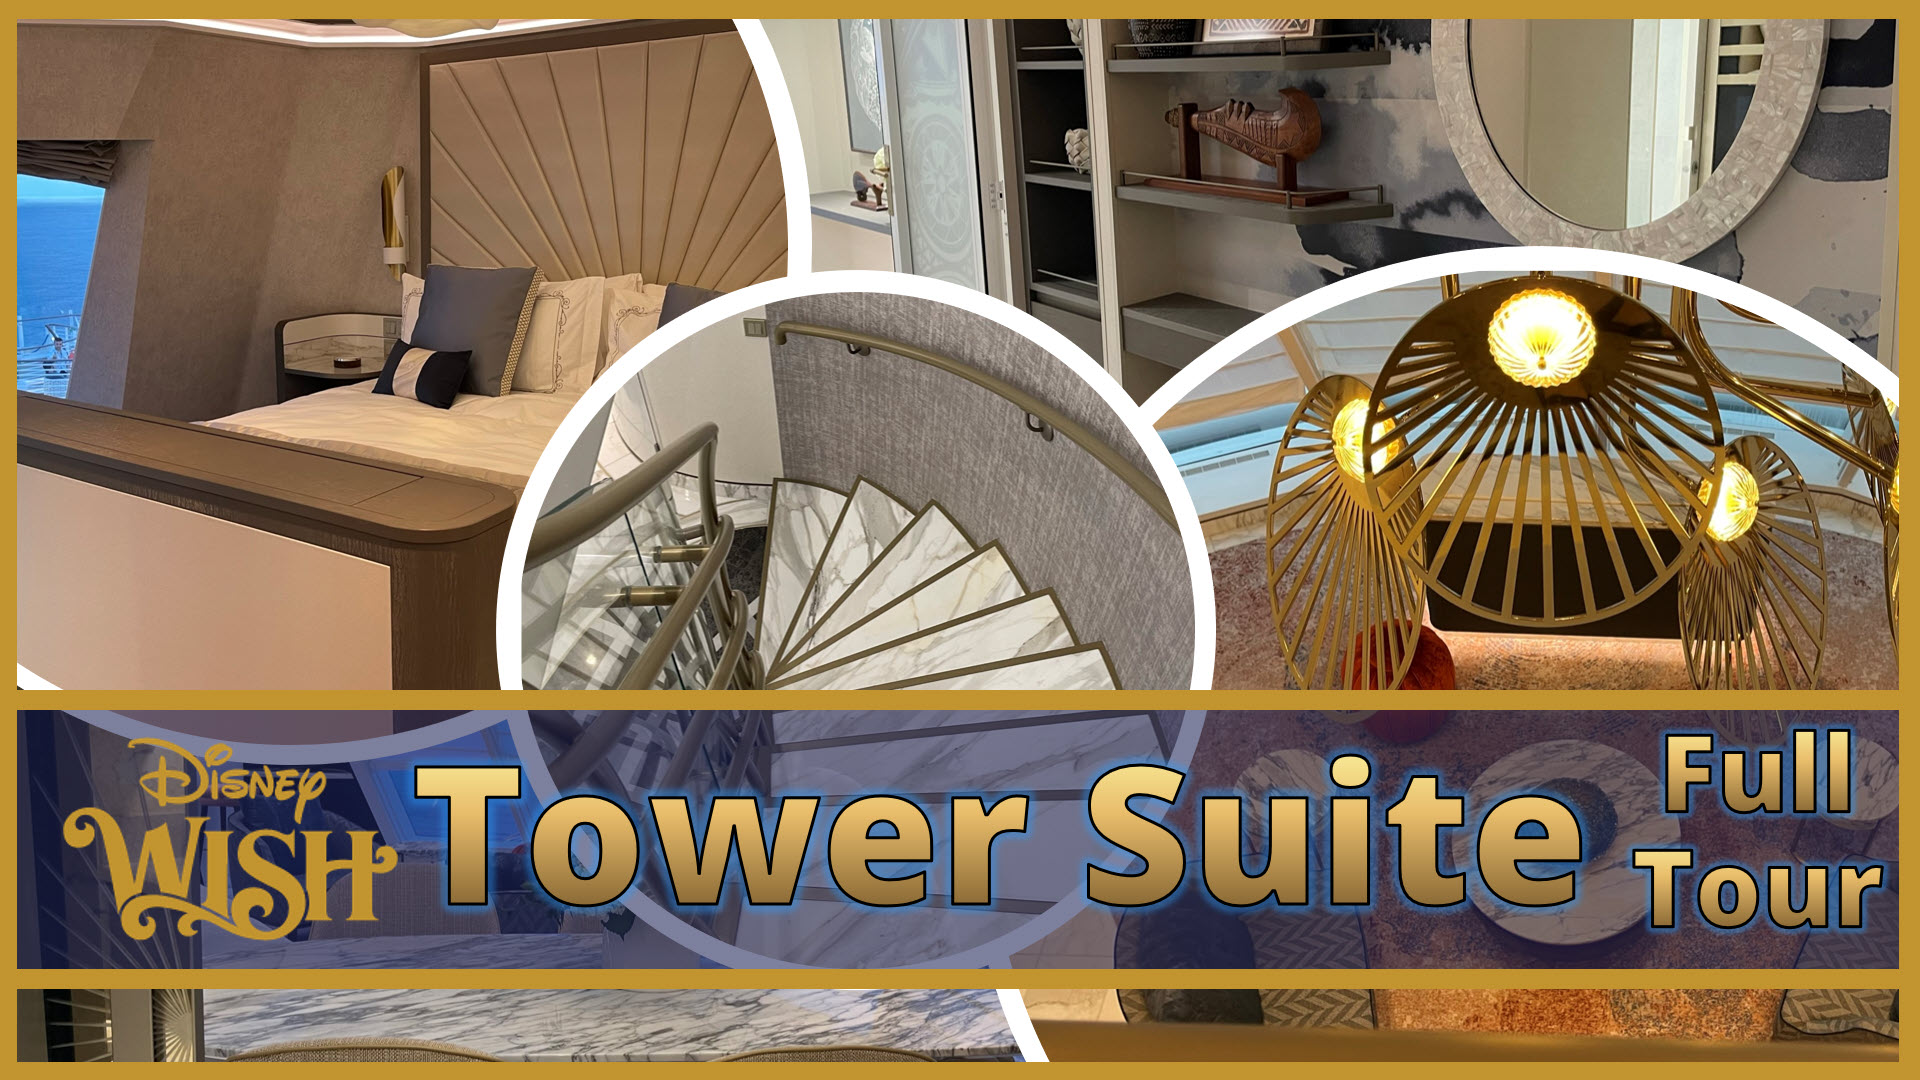 Disney Wish | Tower Suite | Full Tour | Disney Cruise Lines | DCL | Suite in the Sky | First Look